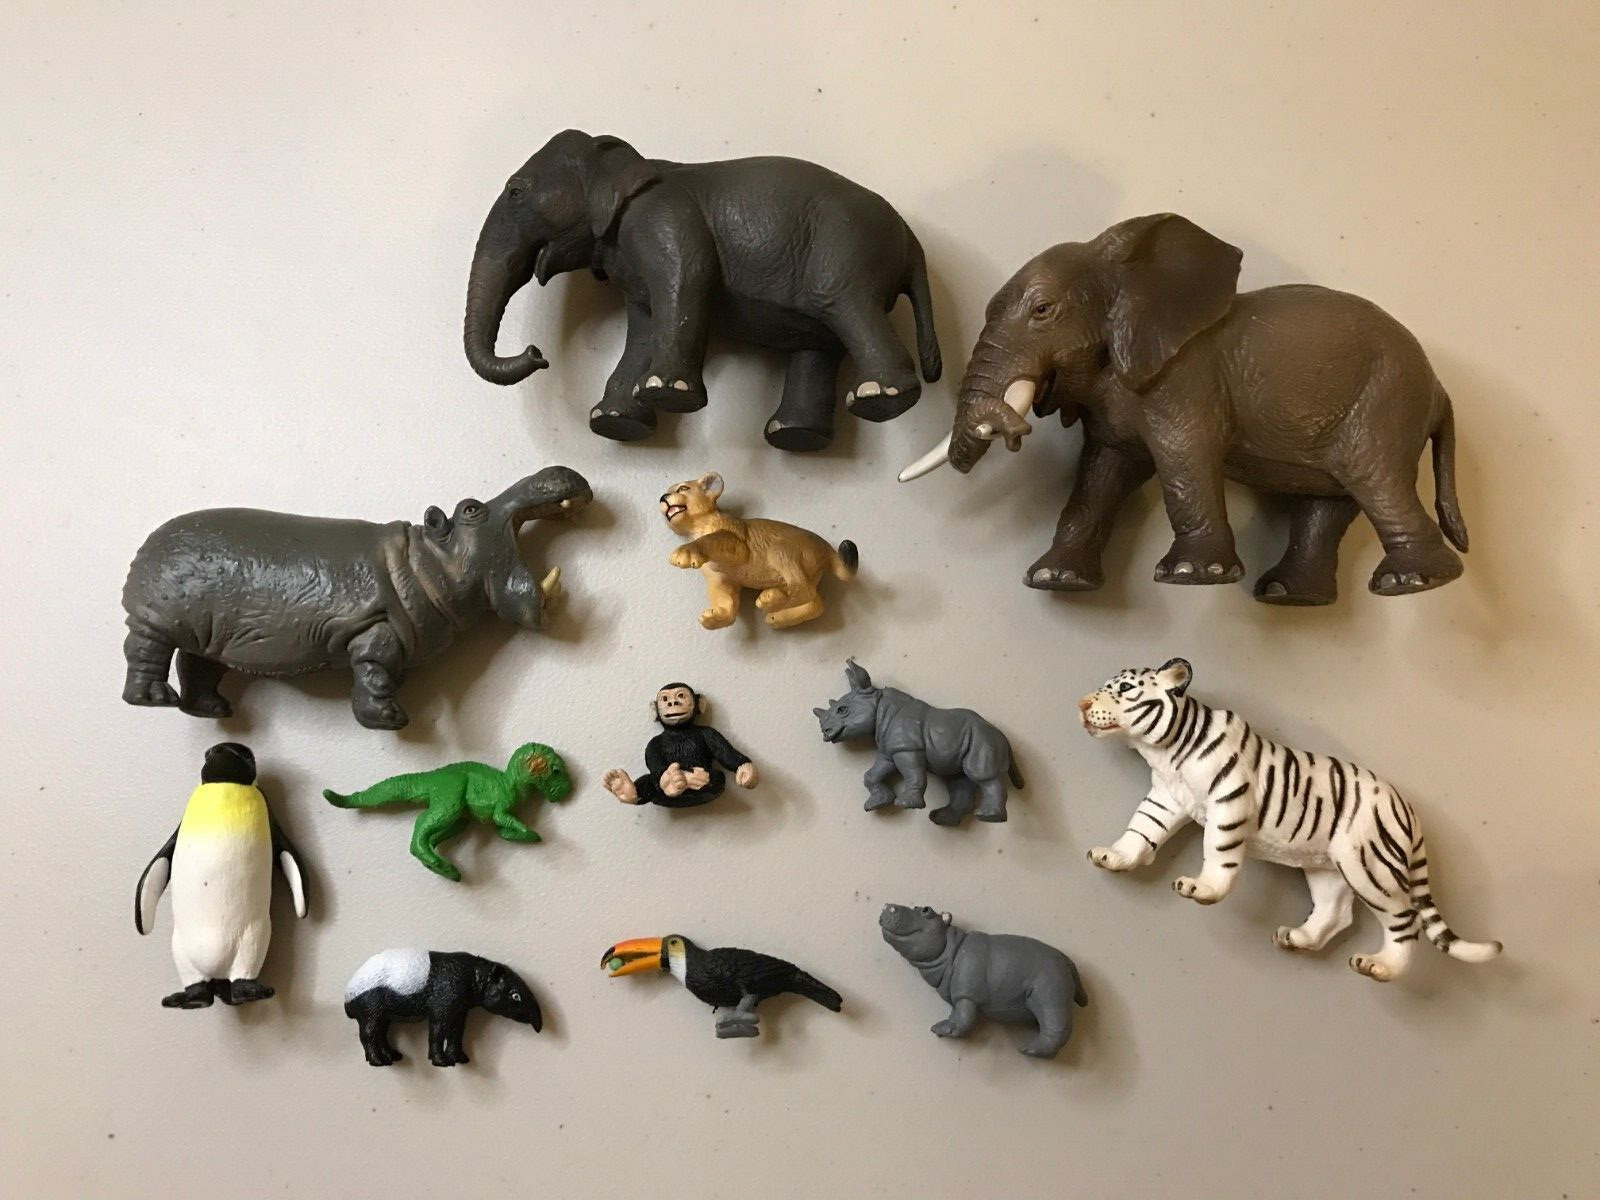 Schleich and Safari Wild Animal Figures Lot of 12 Elephant Hippo Tiger Penguin